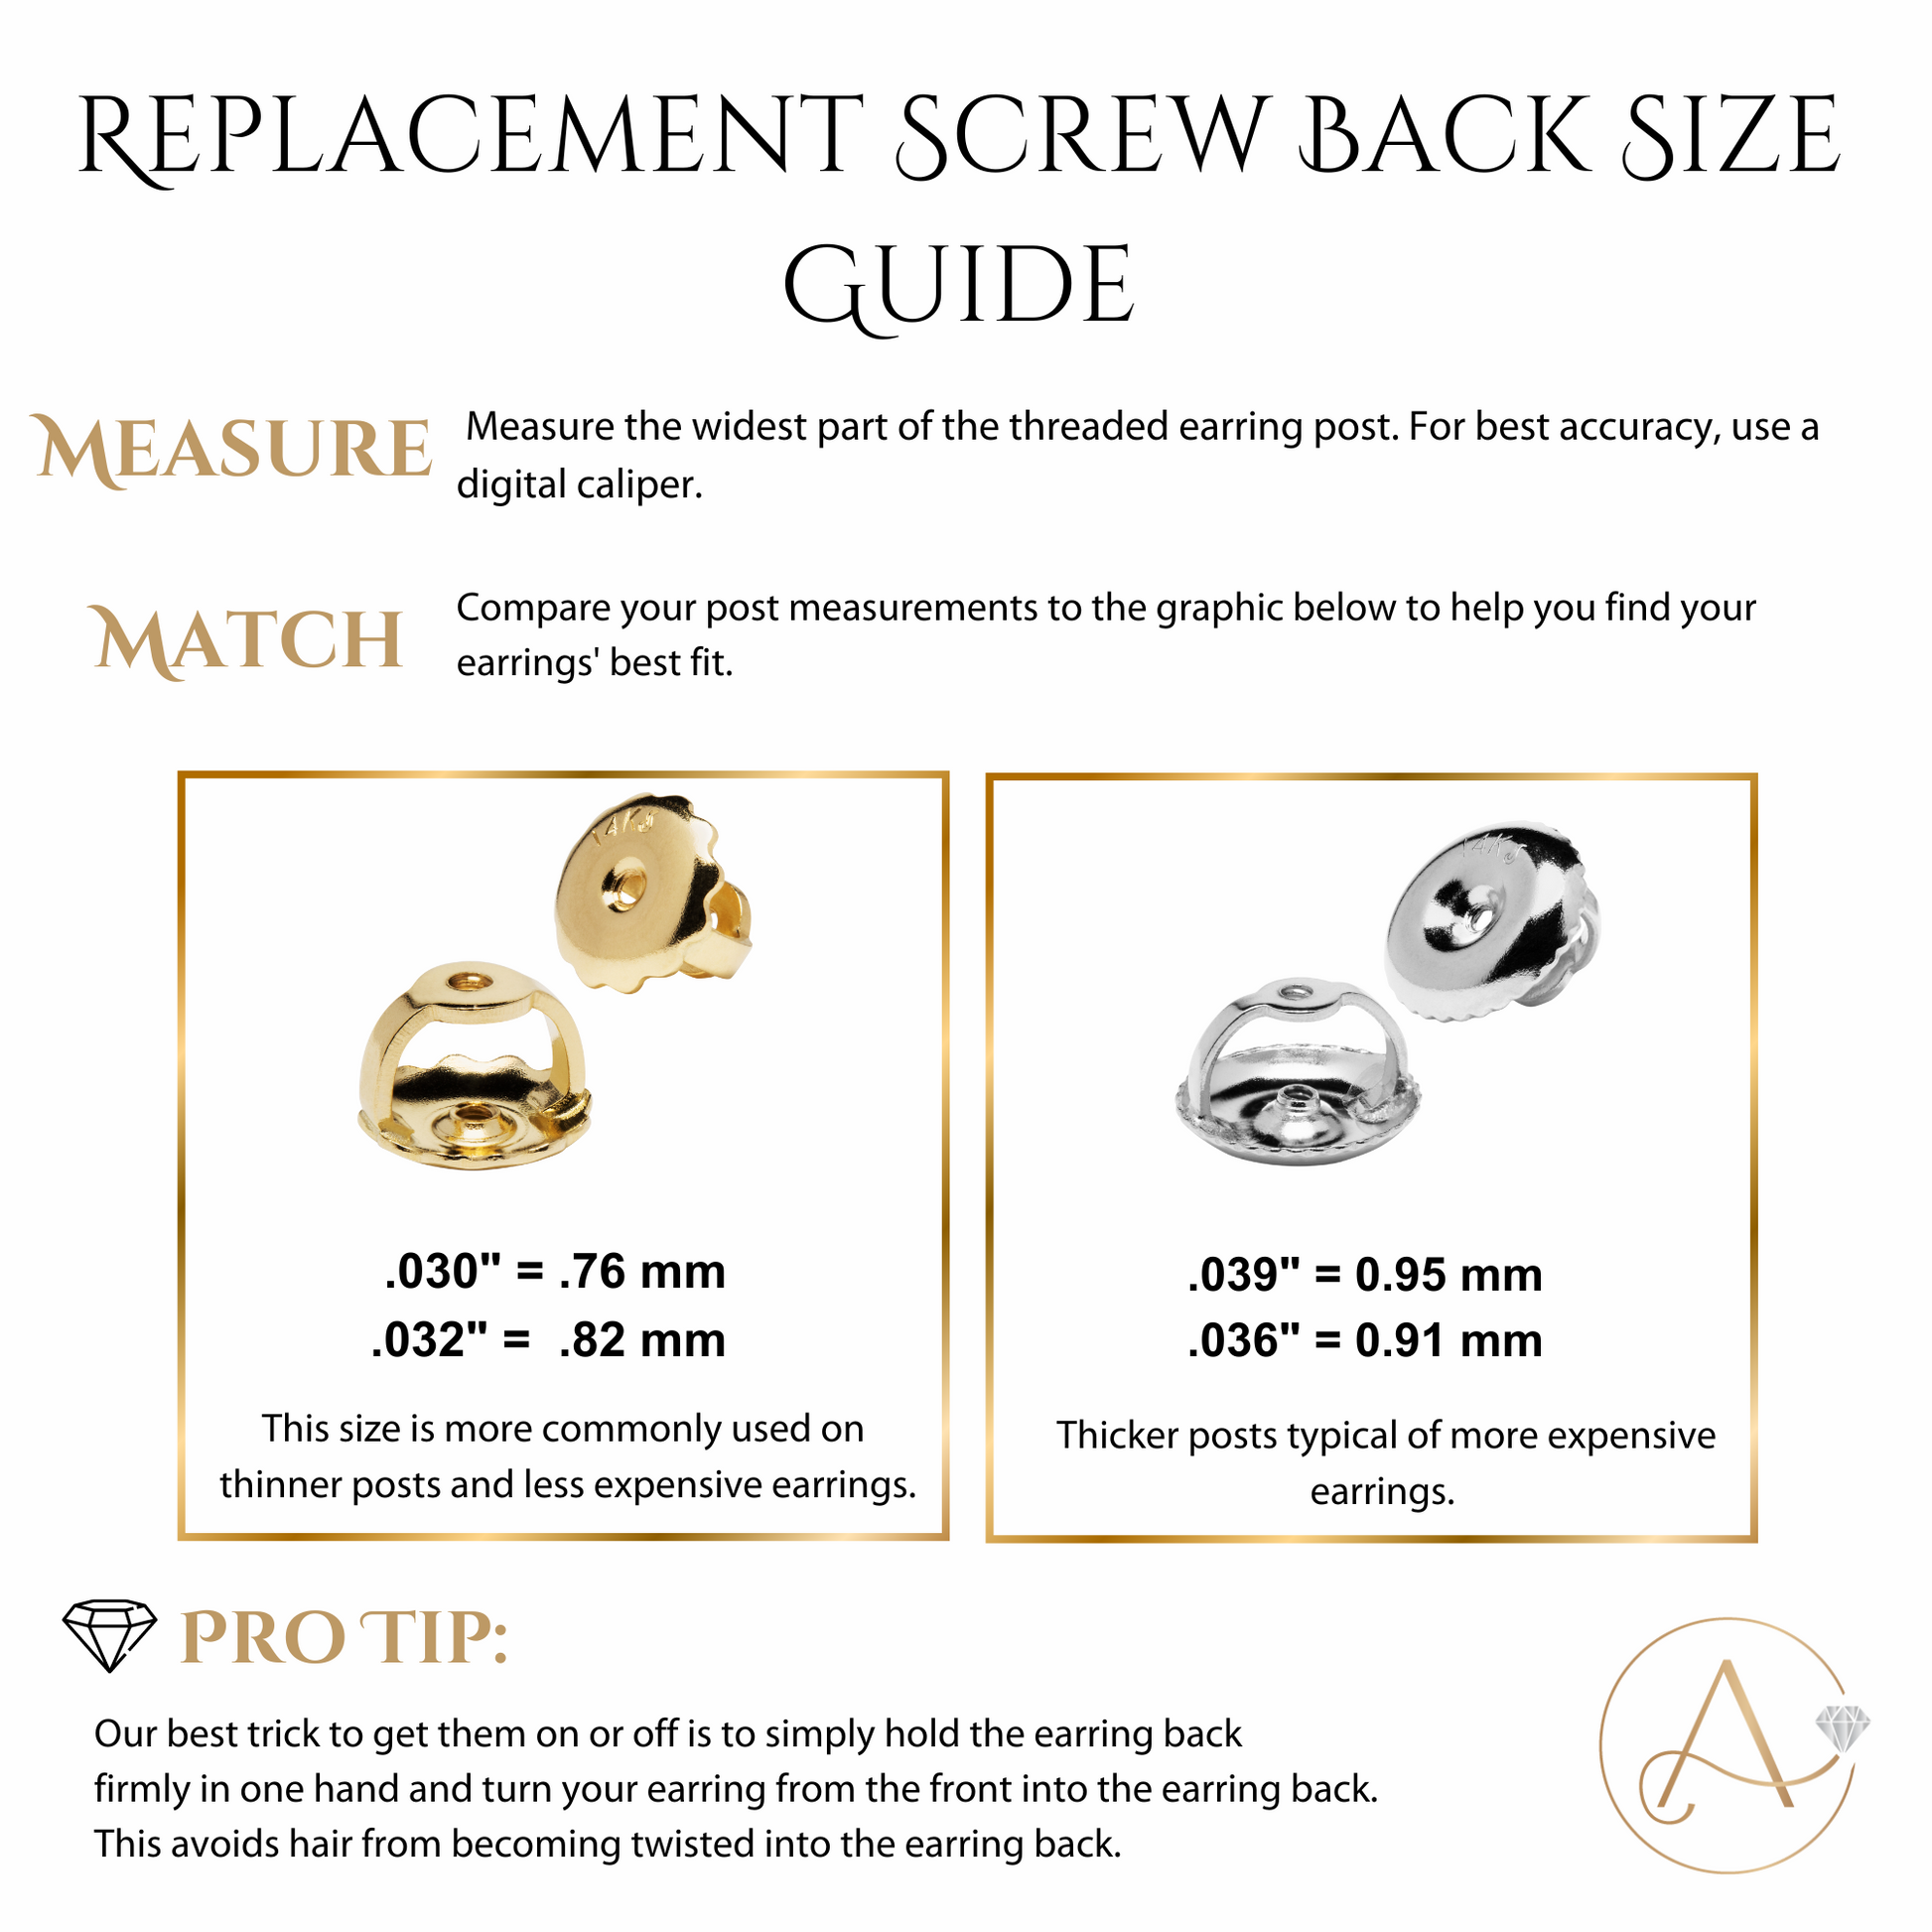 14K Gold Screw-on Earring-Backs Replacement for Threaded Post (0.032'')  Only, 4 Pairs Silver Secure ScrewBack Backing Hypoallergenic (5mm Small)